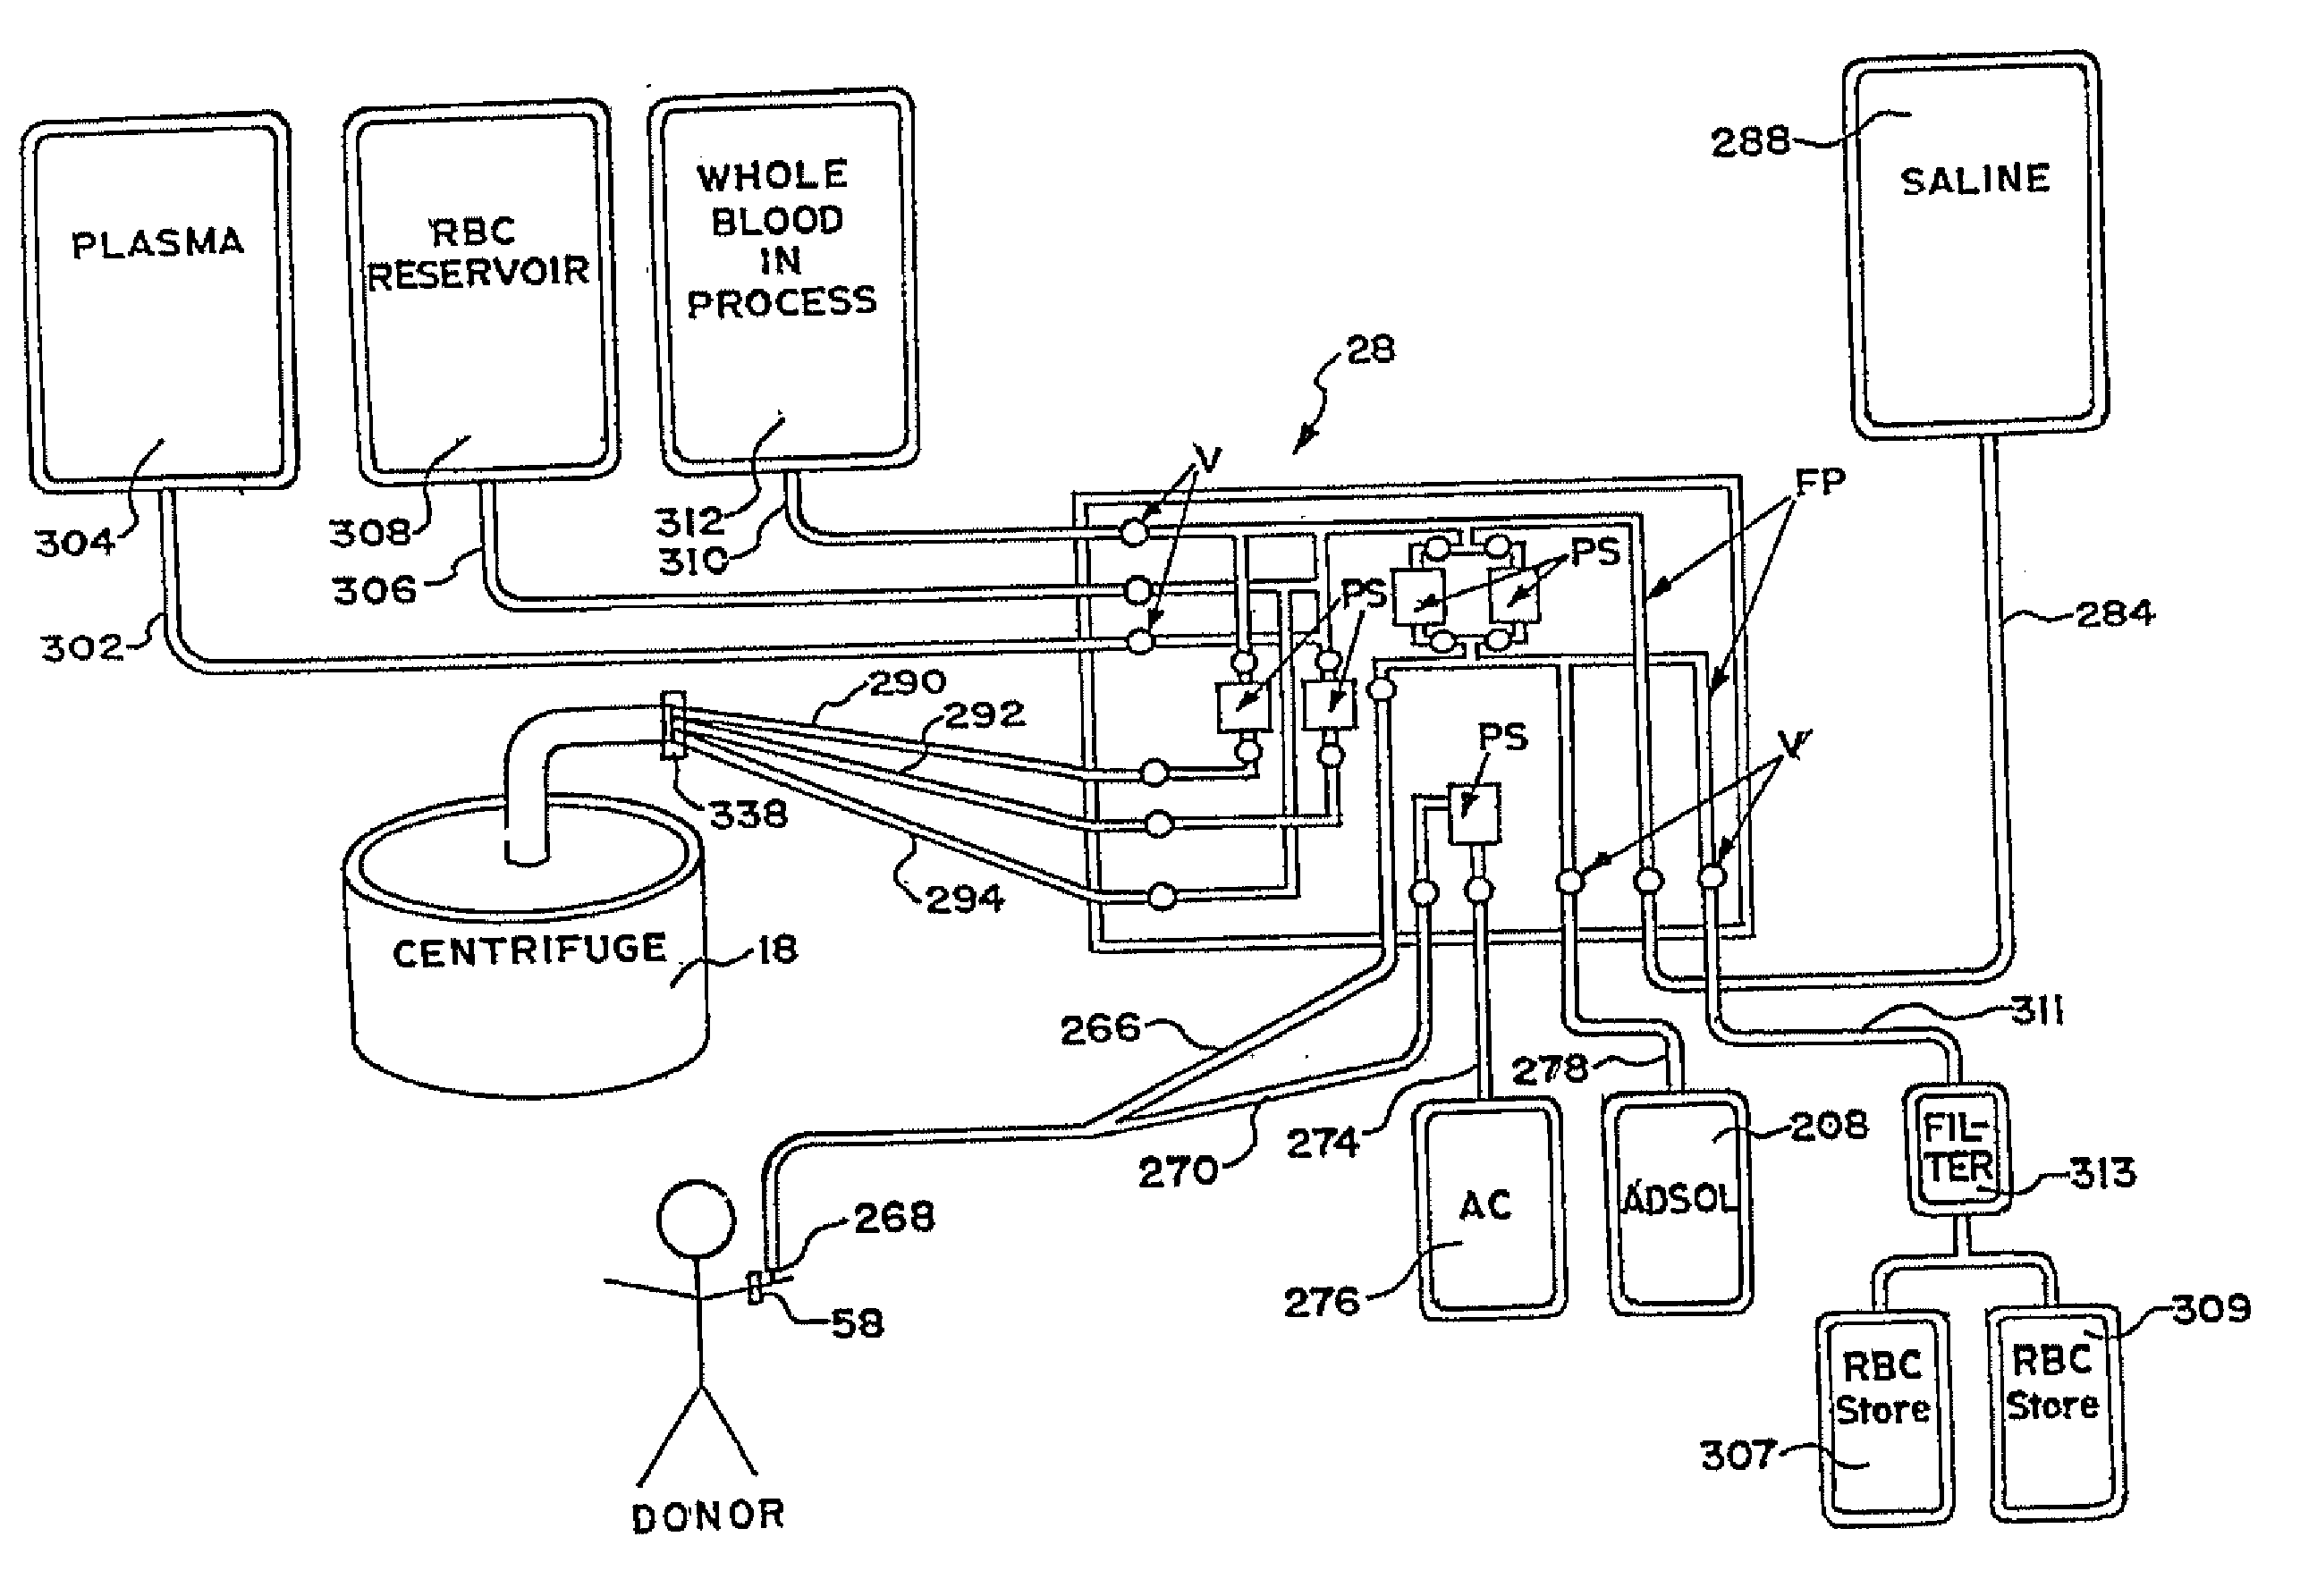 Blood Processing Systems And Methods That Employ An In-Line Flexible Leukofilter